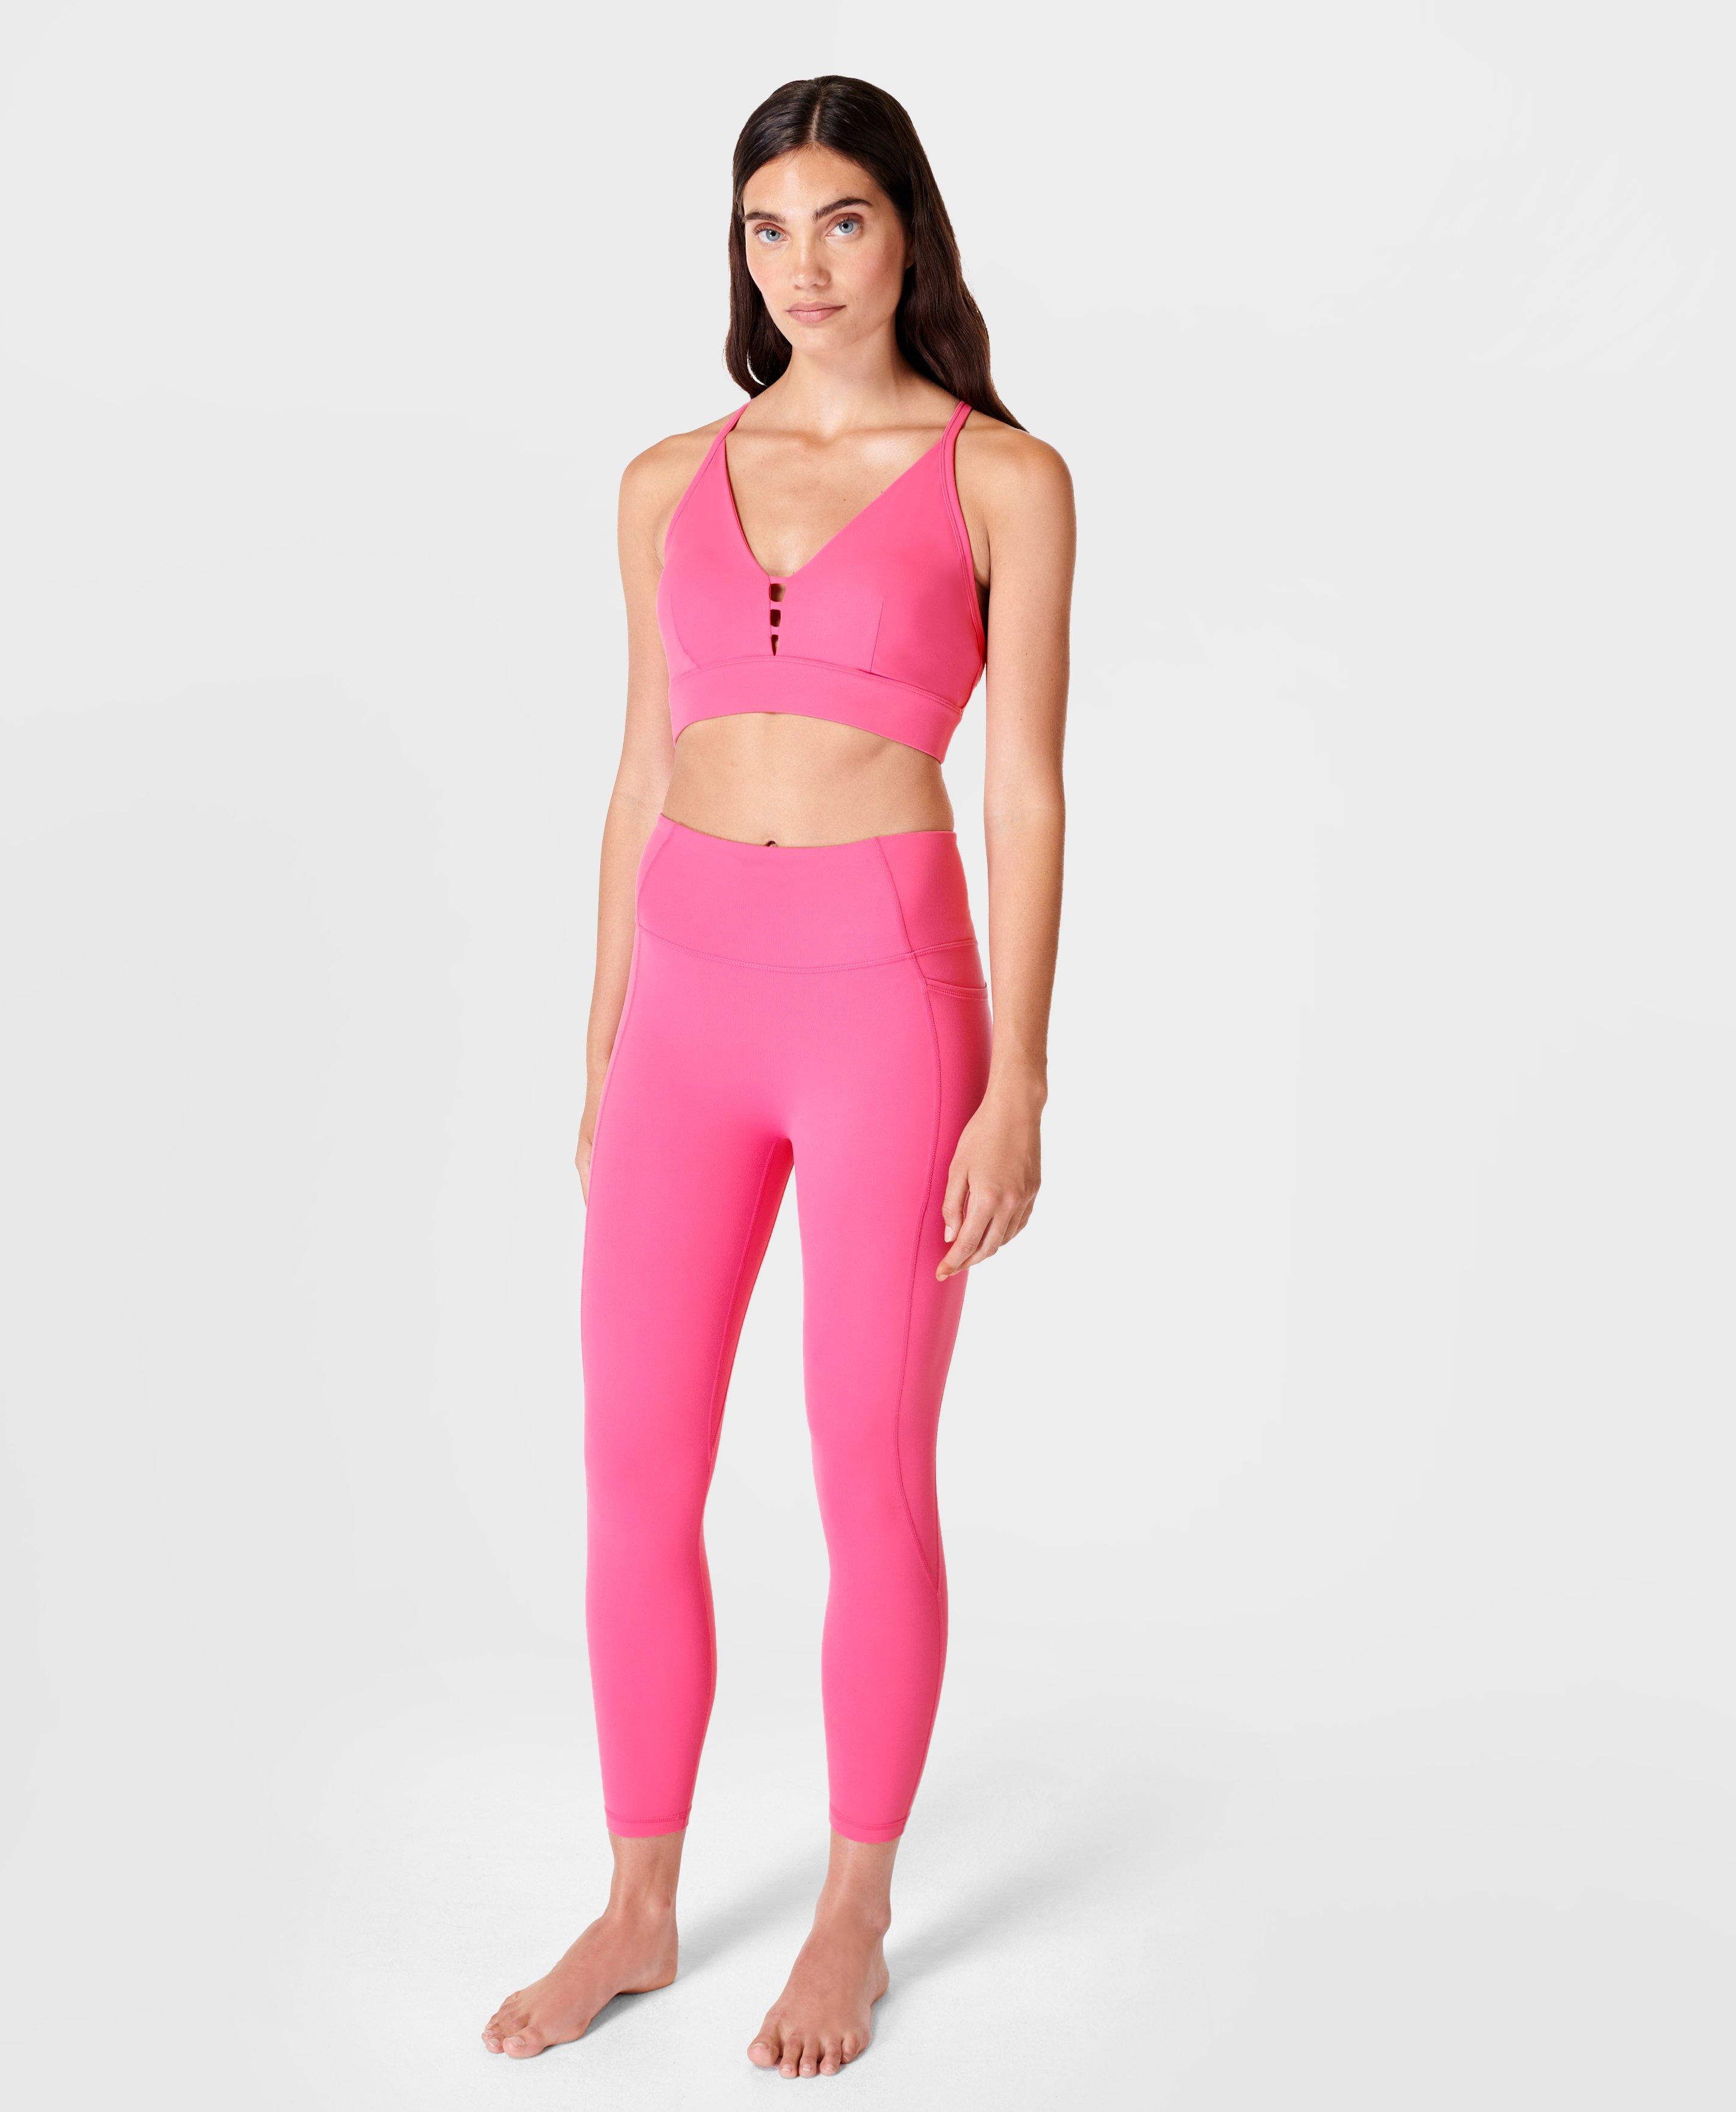 Colorfulkoala Buttery Soft Leggings Pink - $17 - From Patricia